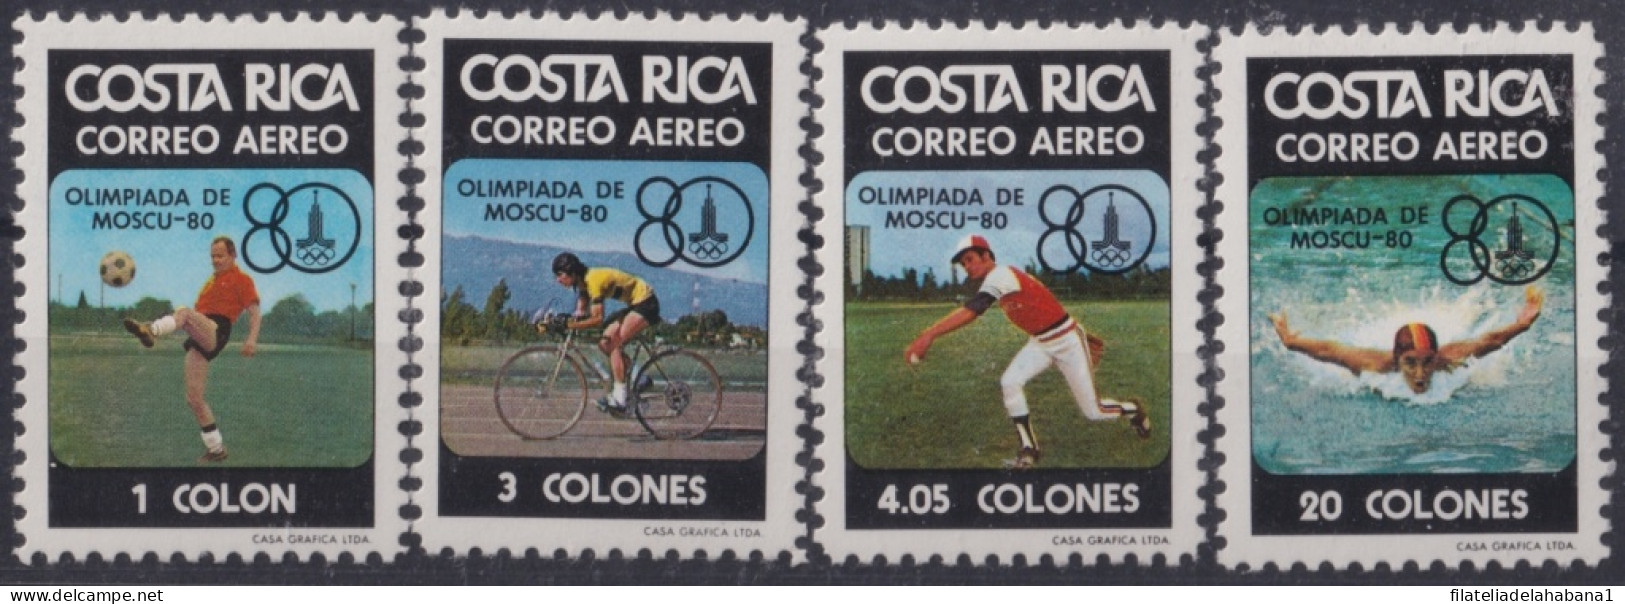 F-EX50099 COSTA RICA MNH 1980 MOSCOW OLYMPIC GAMES CICLING SOCCER BASEBALL.          - Sommer 1980: Moskau